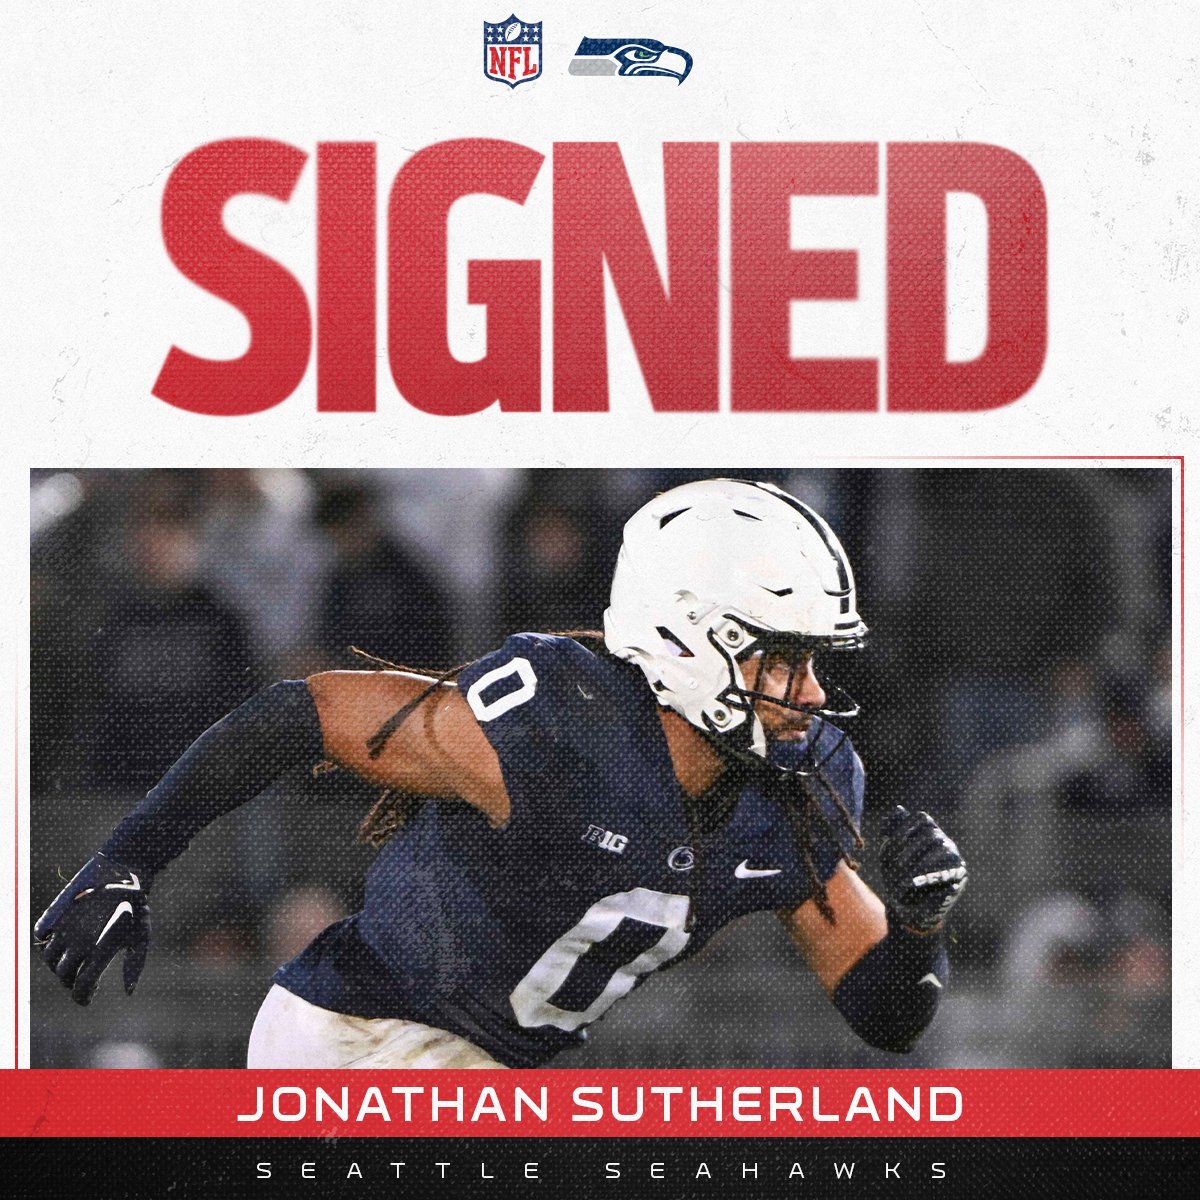 Another Ottawa native to the league! 🏈 Jonathan Sutherland is signing with the @Seahawks 👏